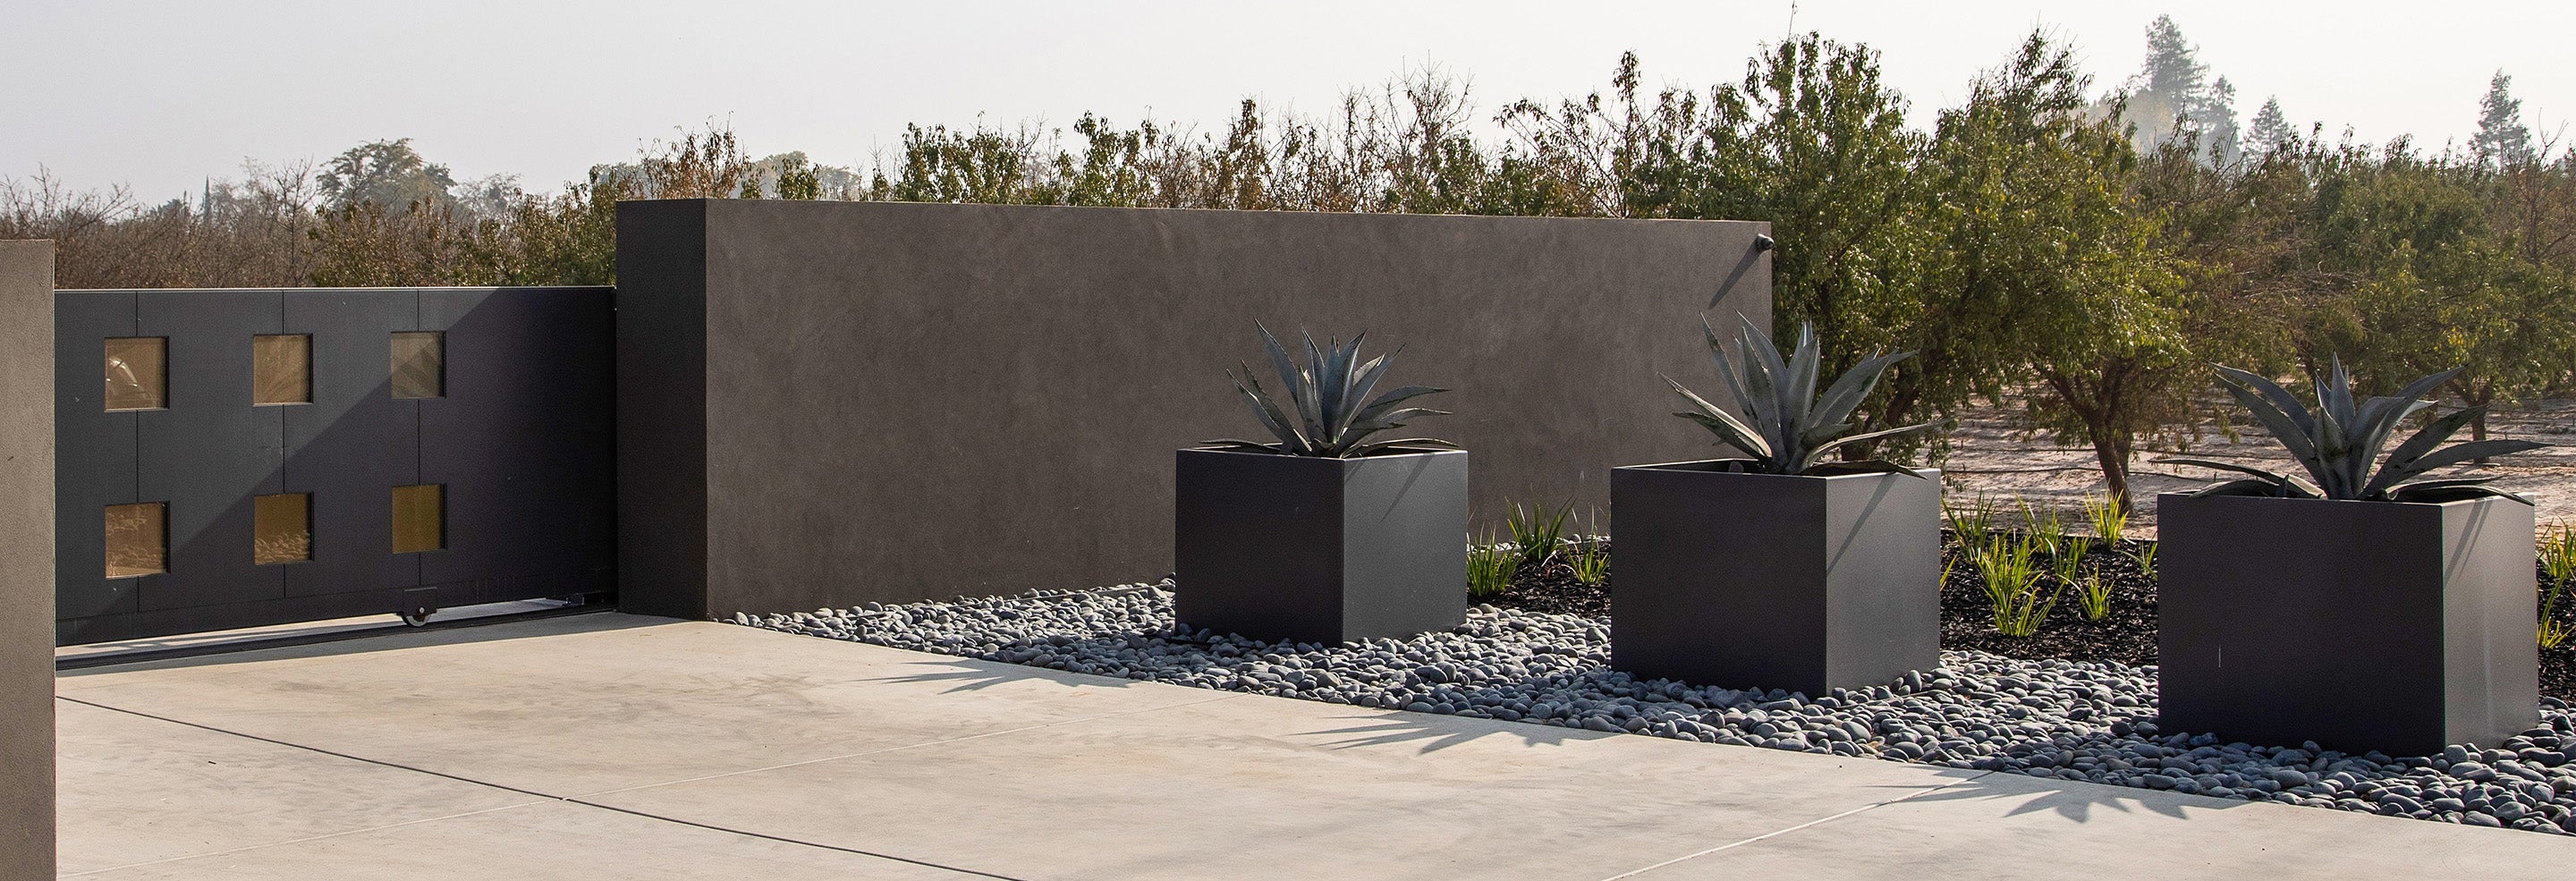 PureModern Large Custom Planters at Private Residence Driveway in CA